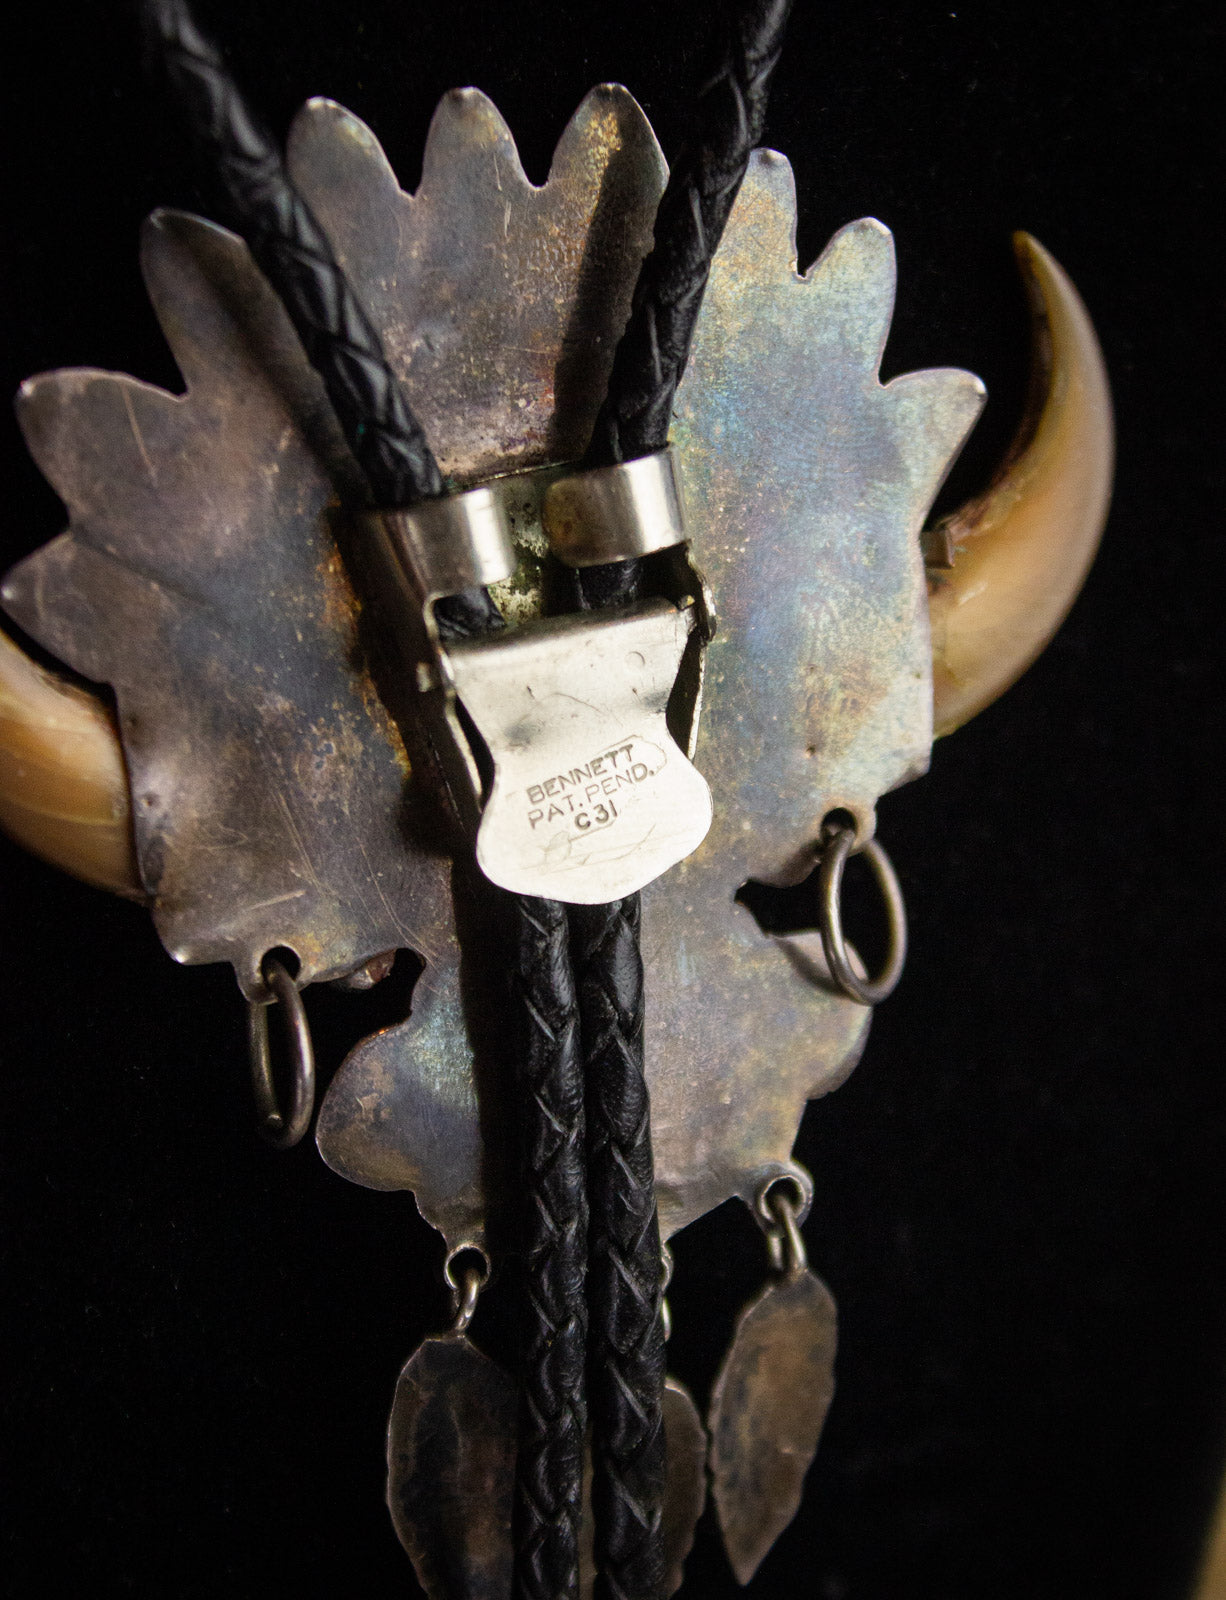 Vintage Sterling Silver, Turquoise, and Bear Claw Bolo Tie